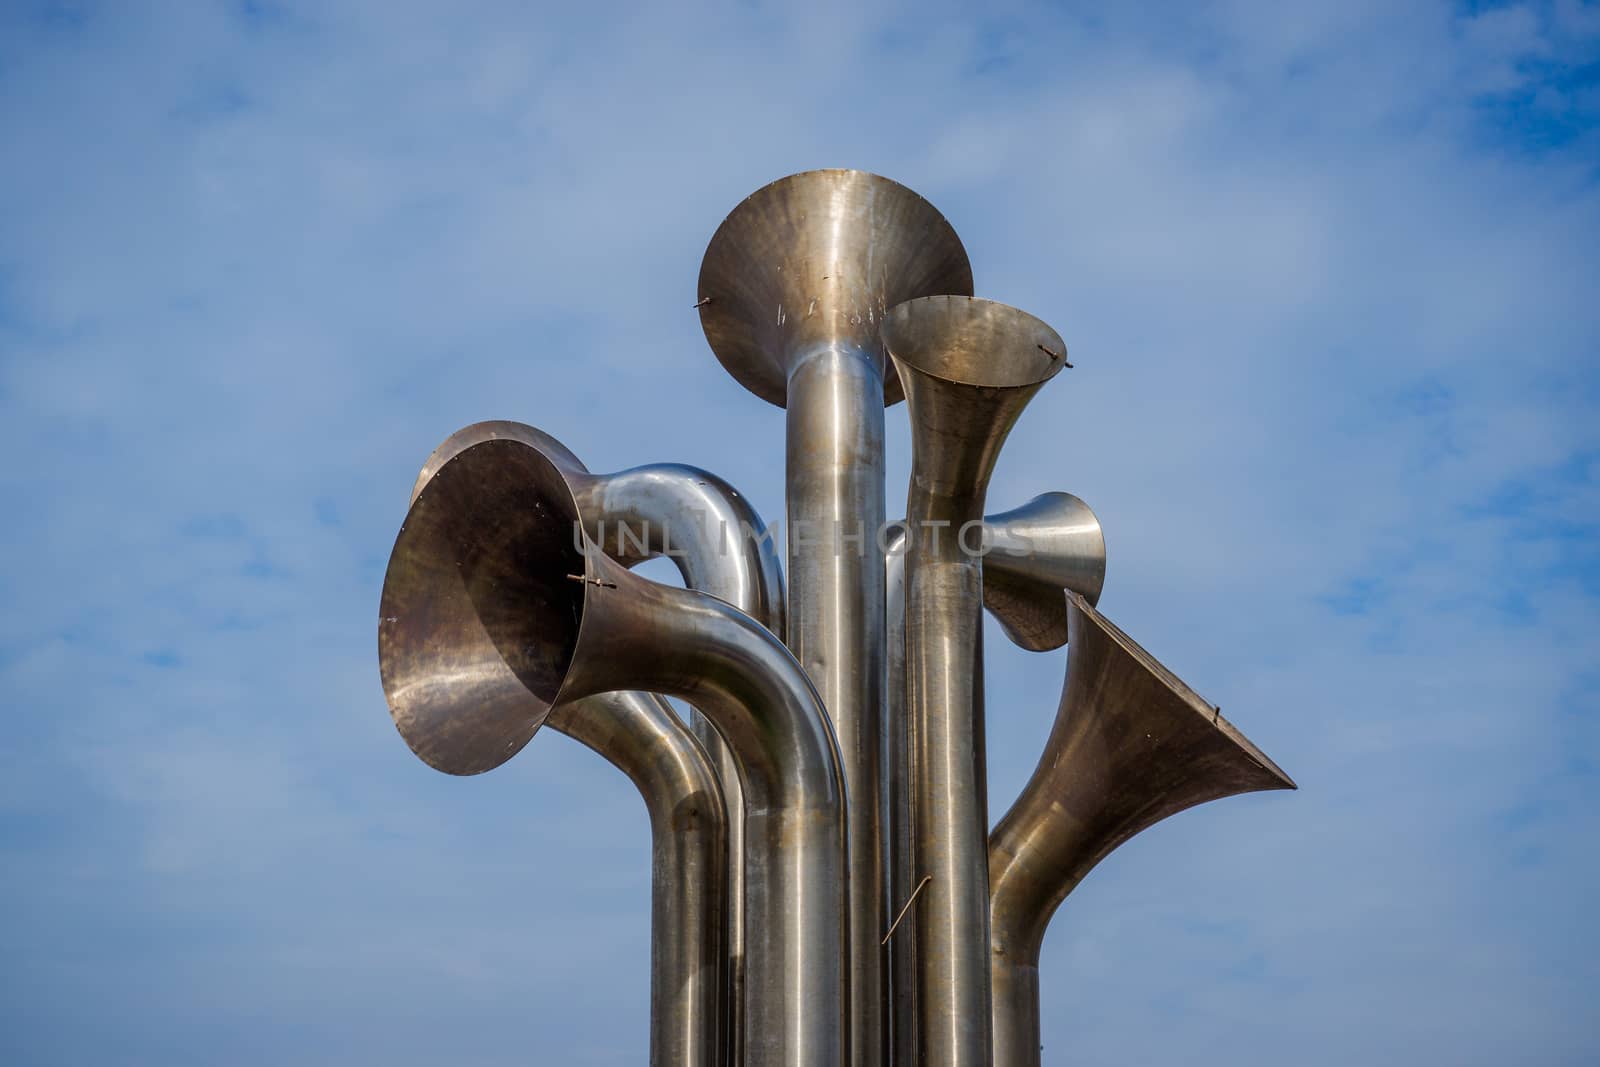 a number of polished steel trumpet shapes made into a sculpture Morecambe